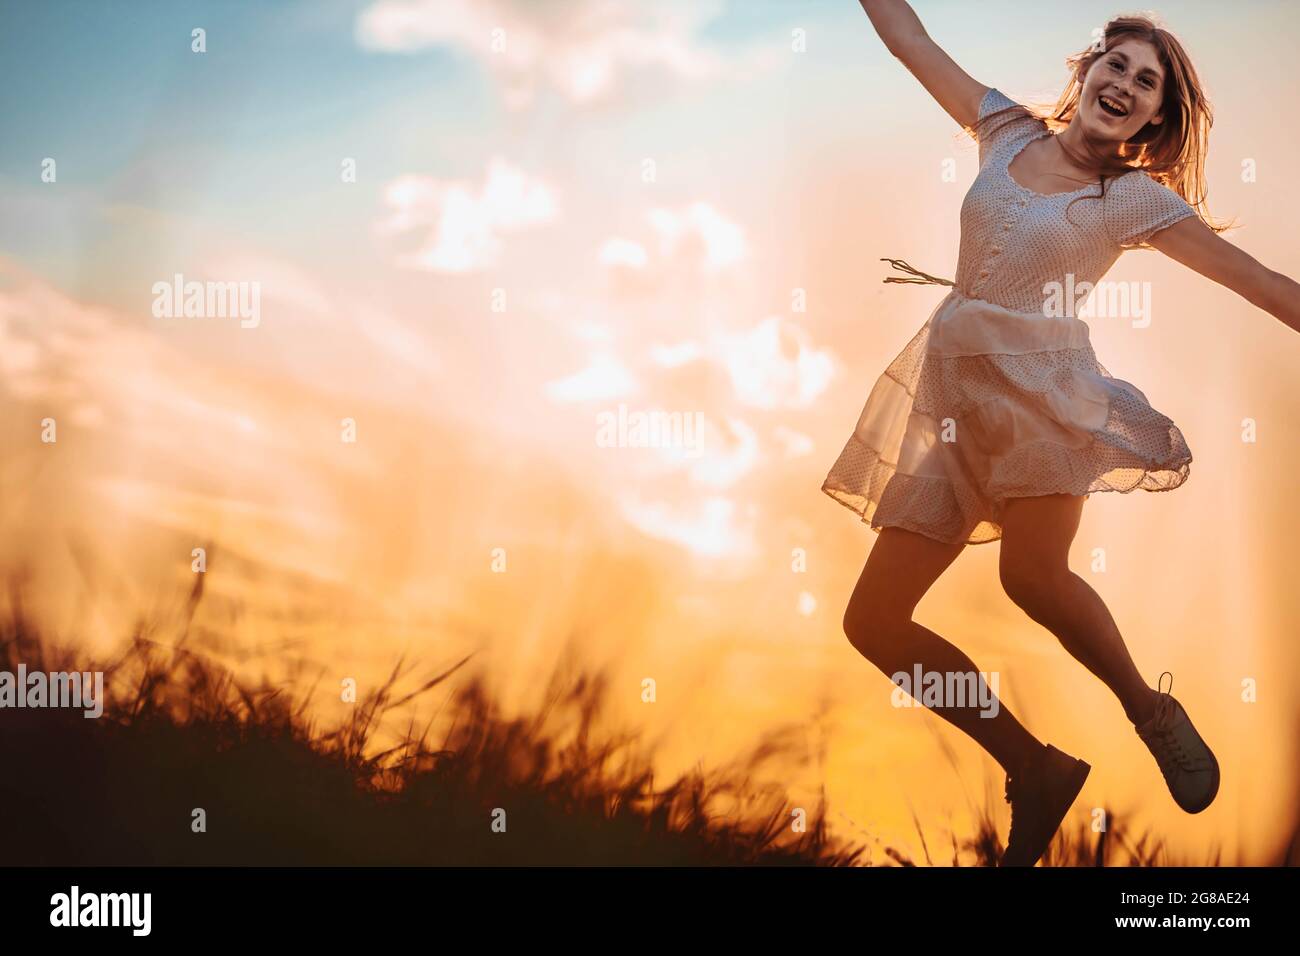 Outdoors photo of young, teen, ginger girl jumping, looking very happy and excited. Copy space Stock Photo